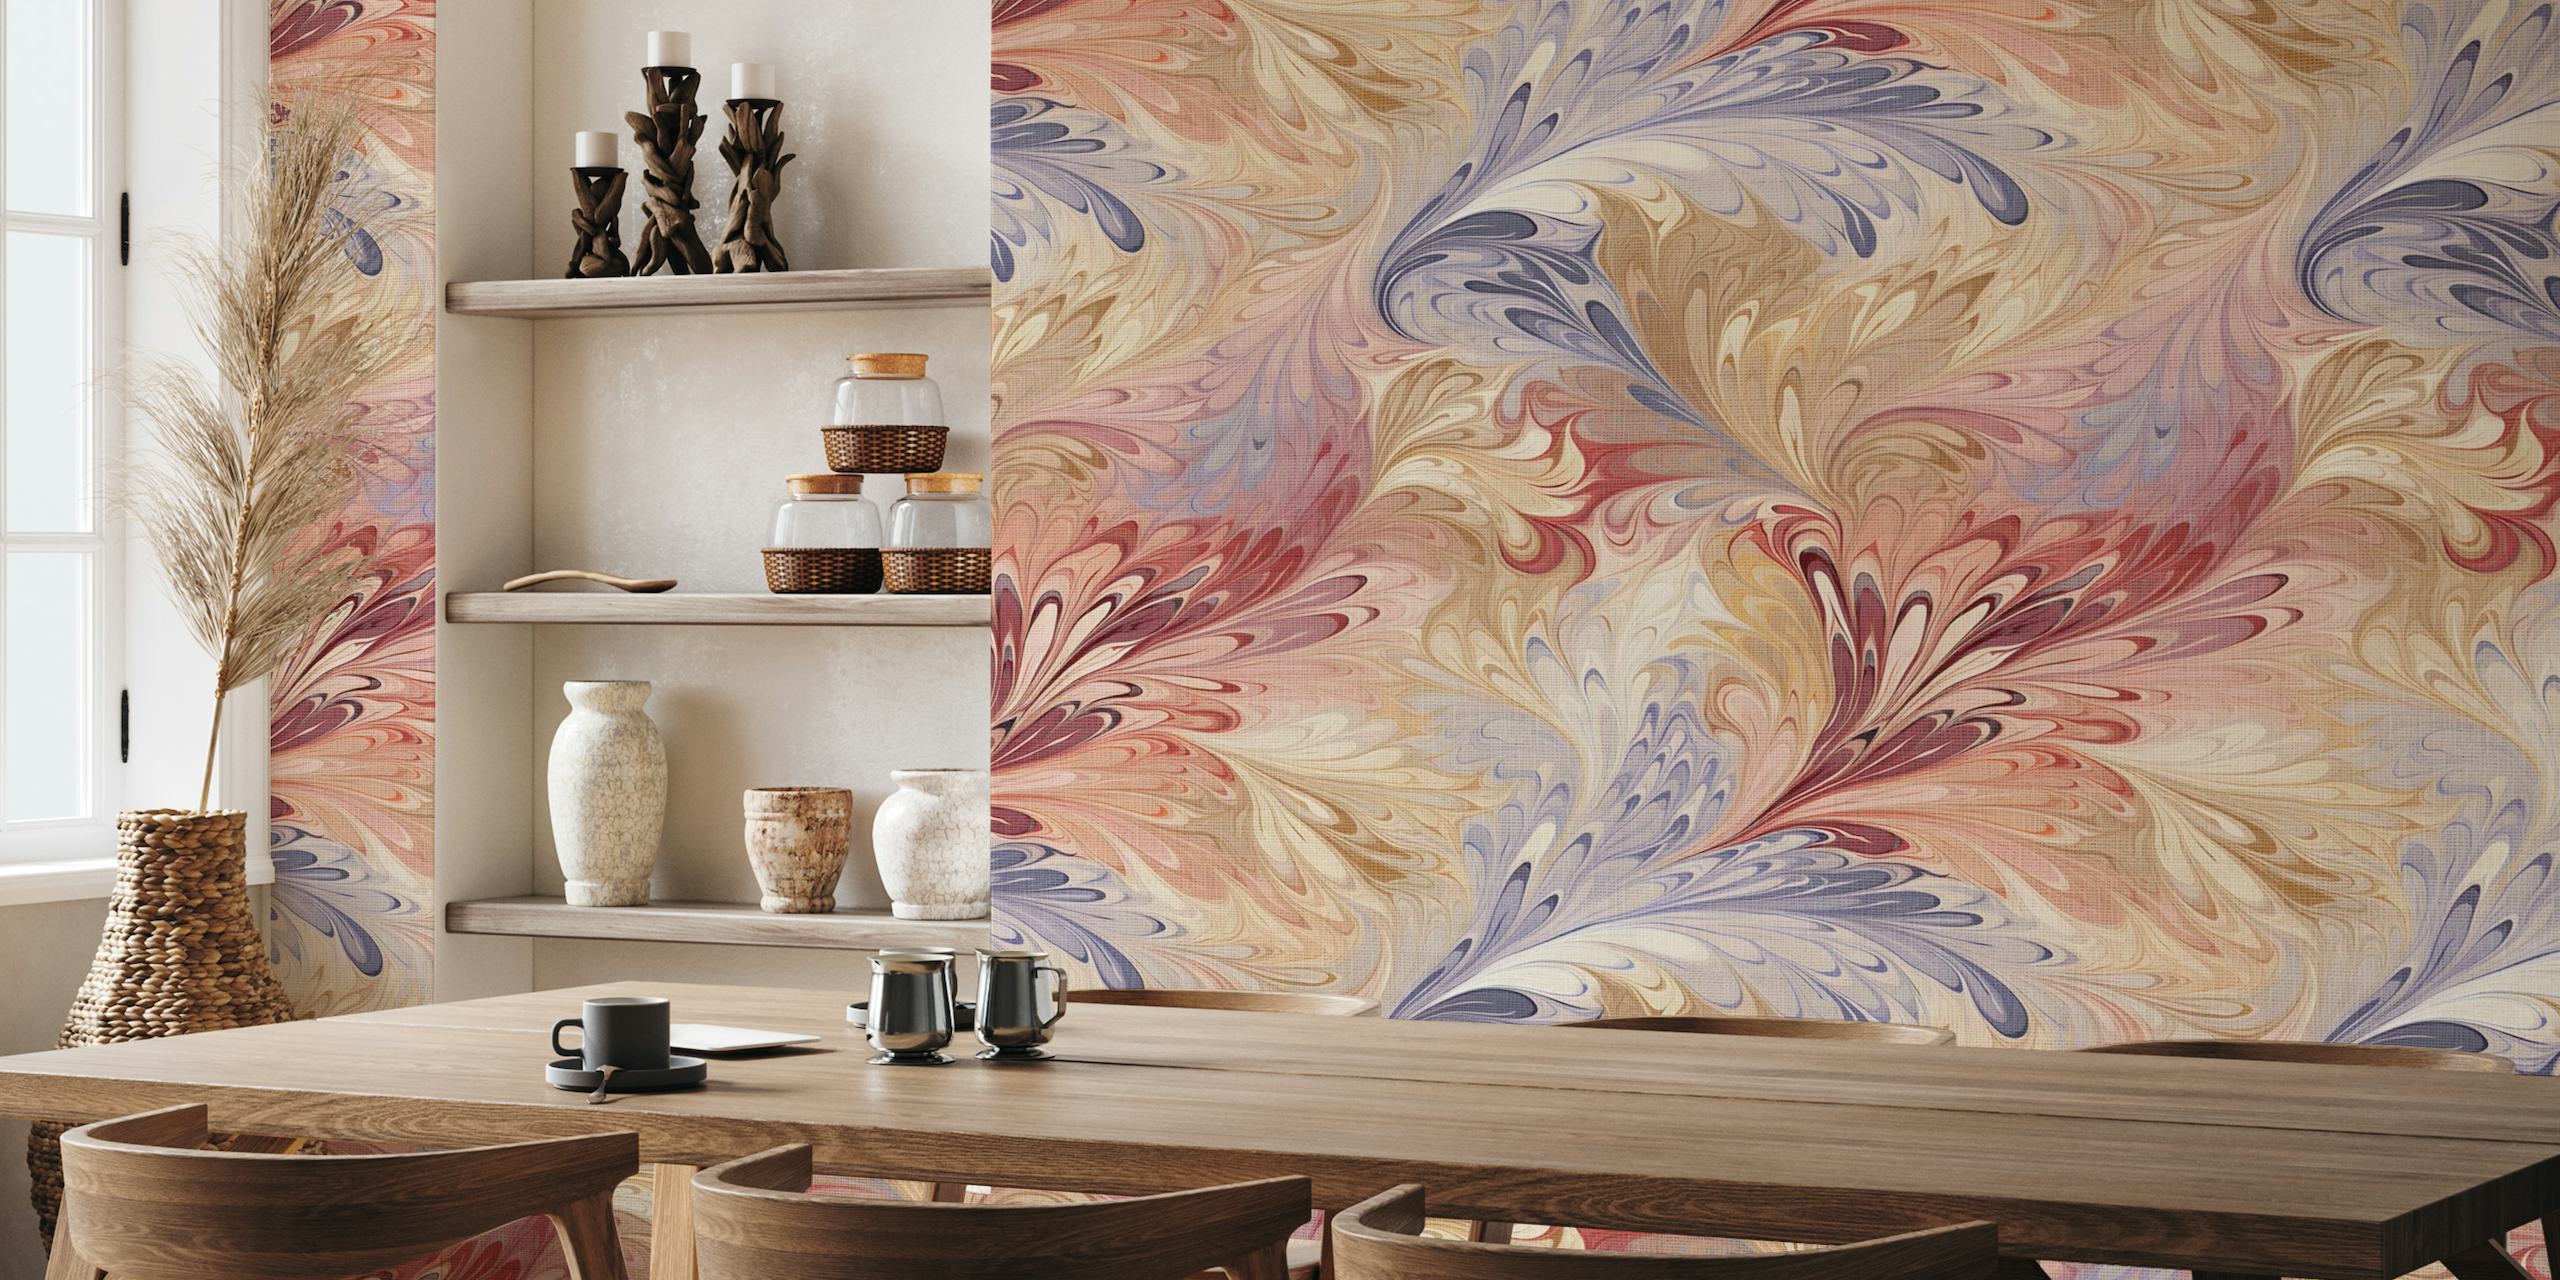 Italian marbled paper pattern wall mural with pink, blue, and cream swirls